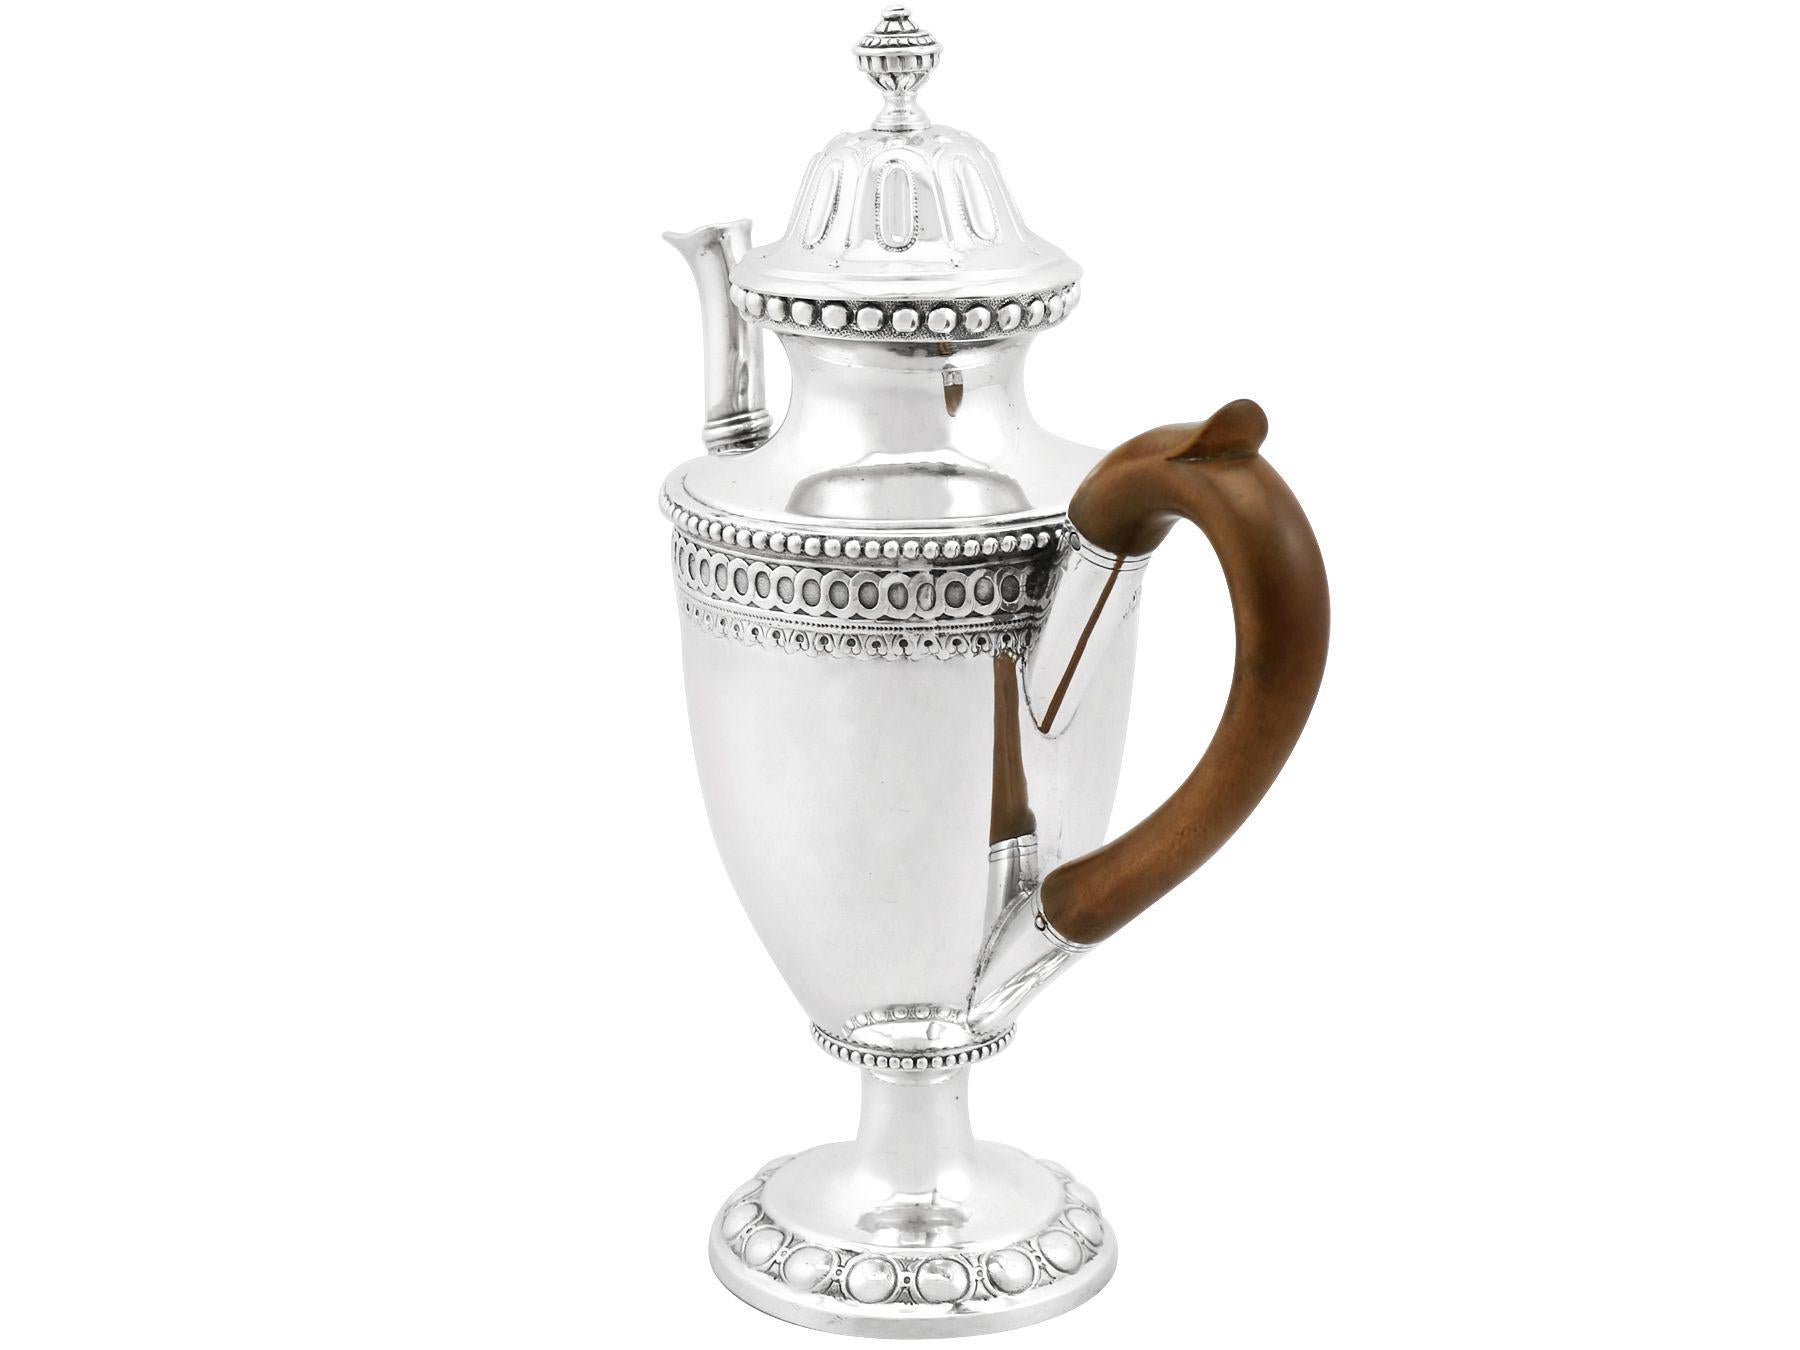 An exceptional, fine and impressive antique German silver coffee pot; an addition to our 18th century silver teaware collection.

This exceptional antique German silver coffee pot has a circular rounded form onto a circular pedestal foot.

The